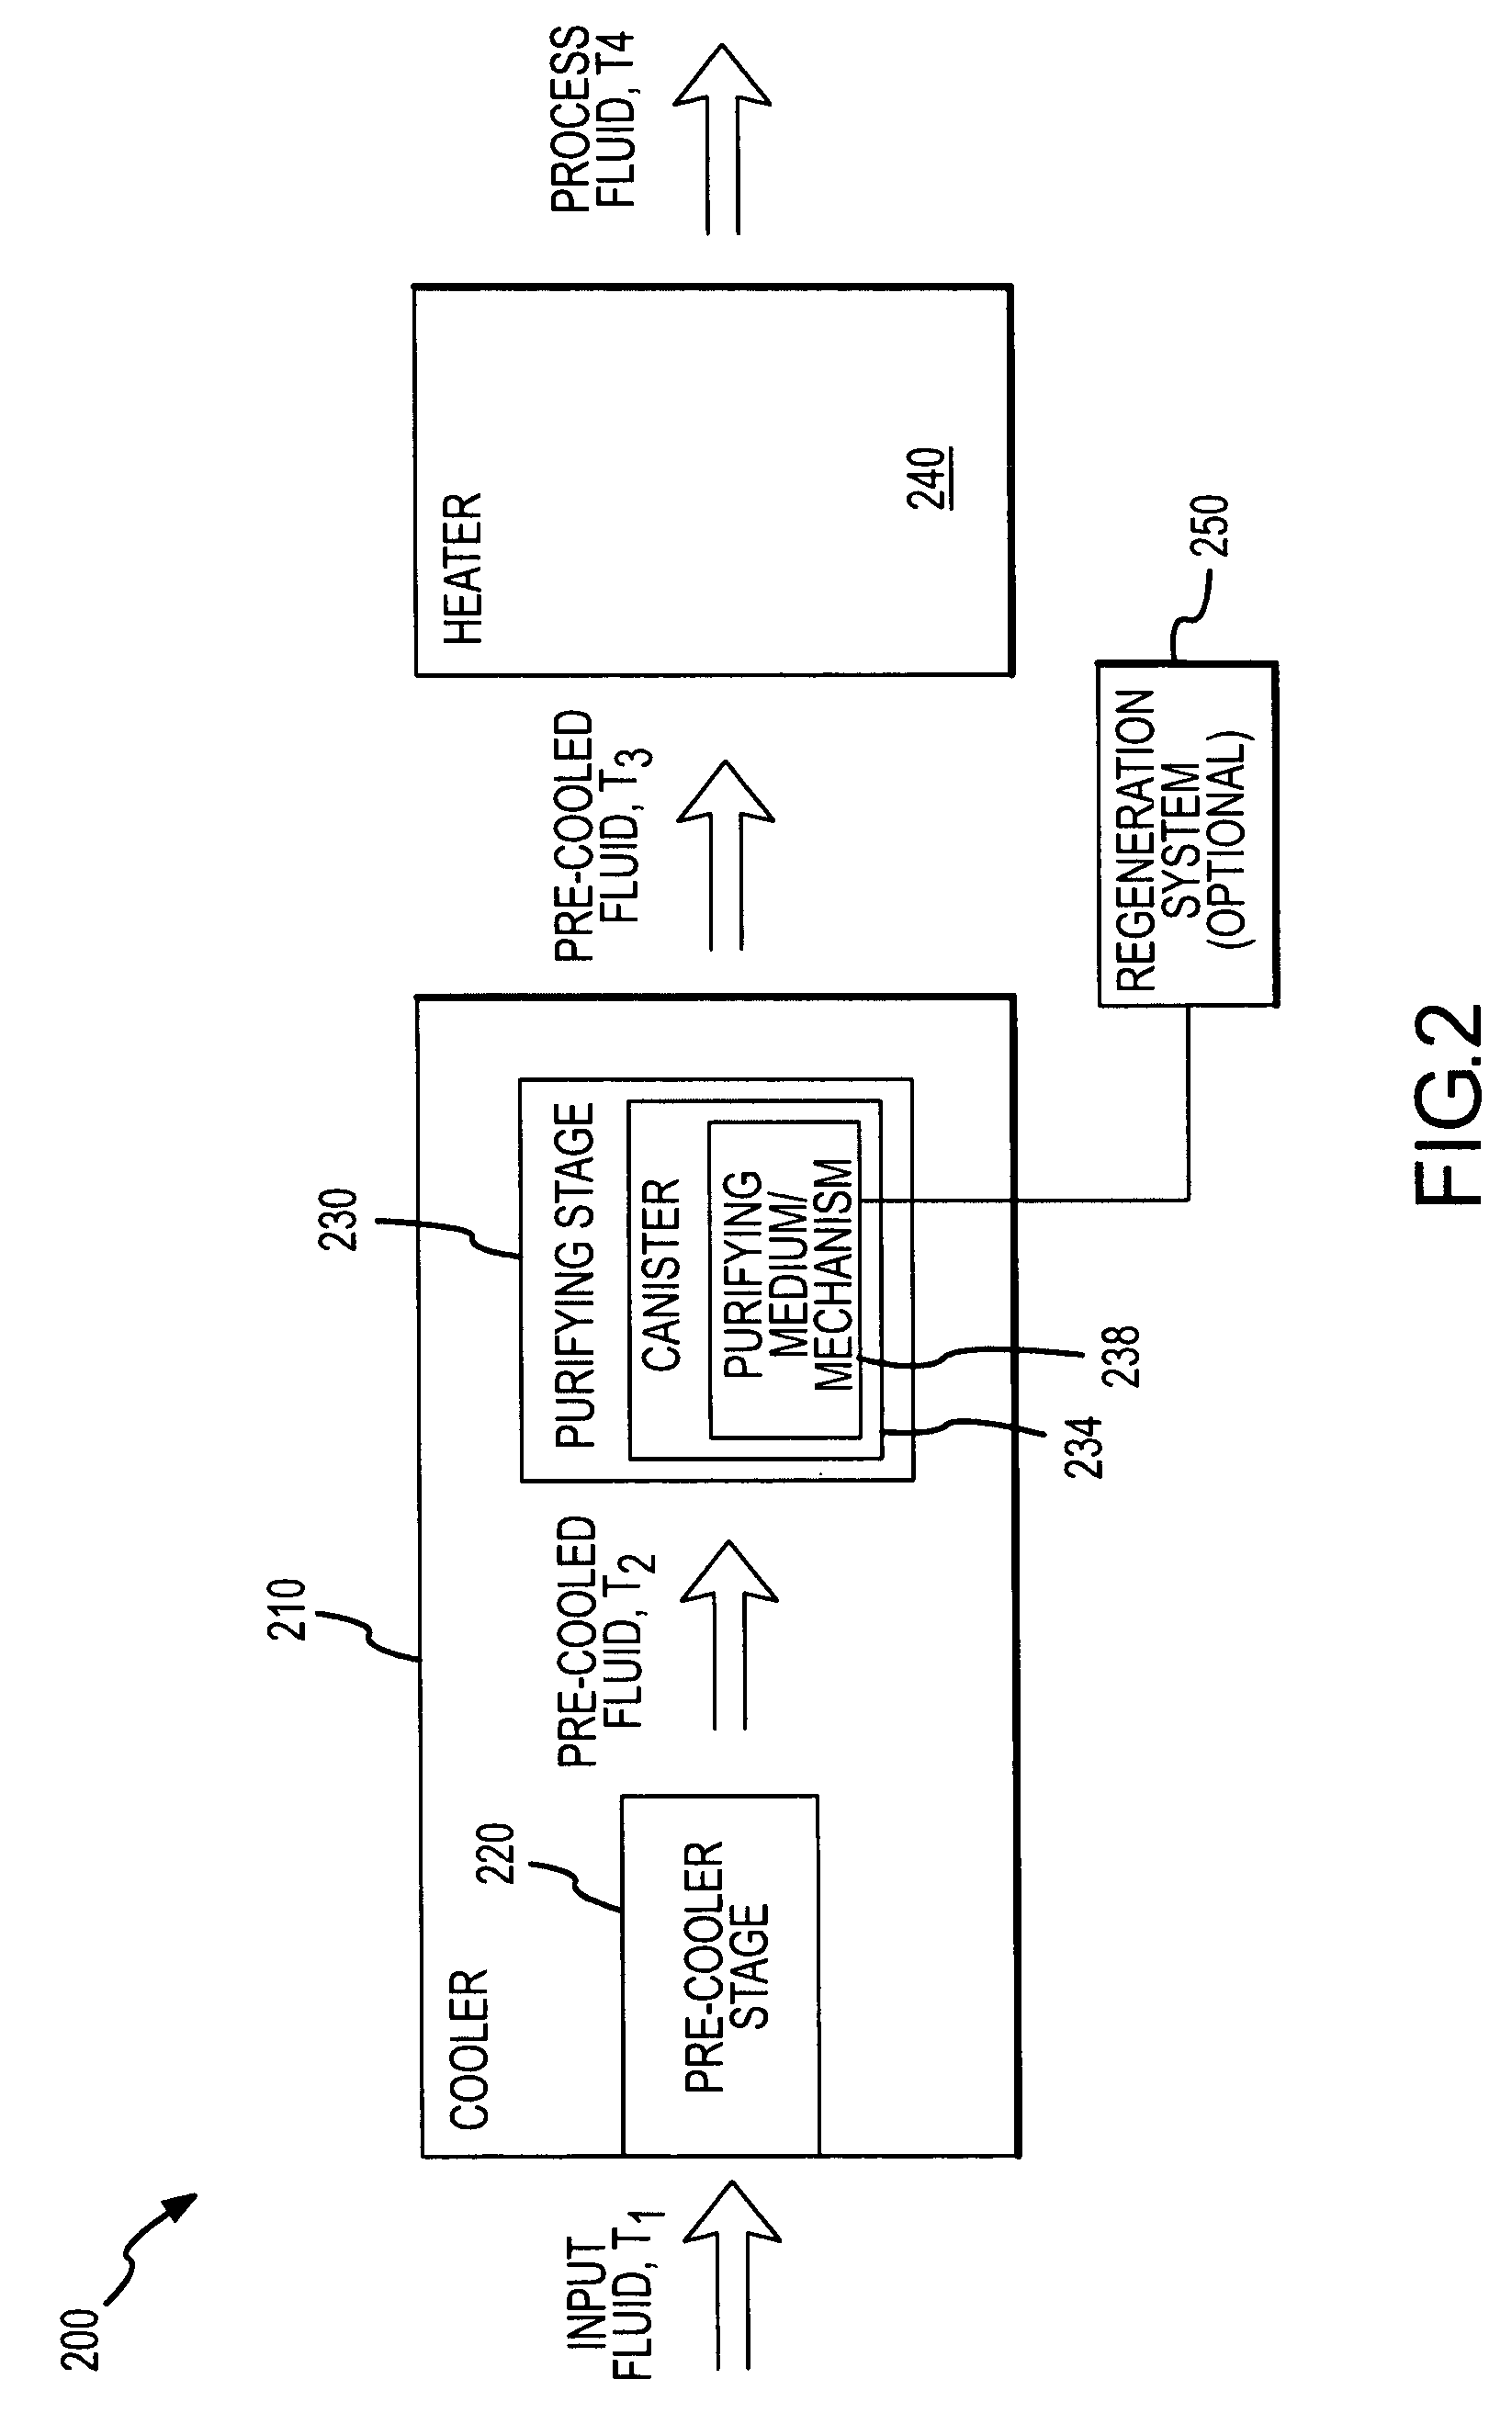 Fluid purification system with low temperature purifier